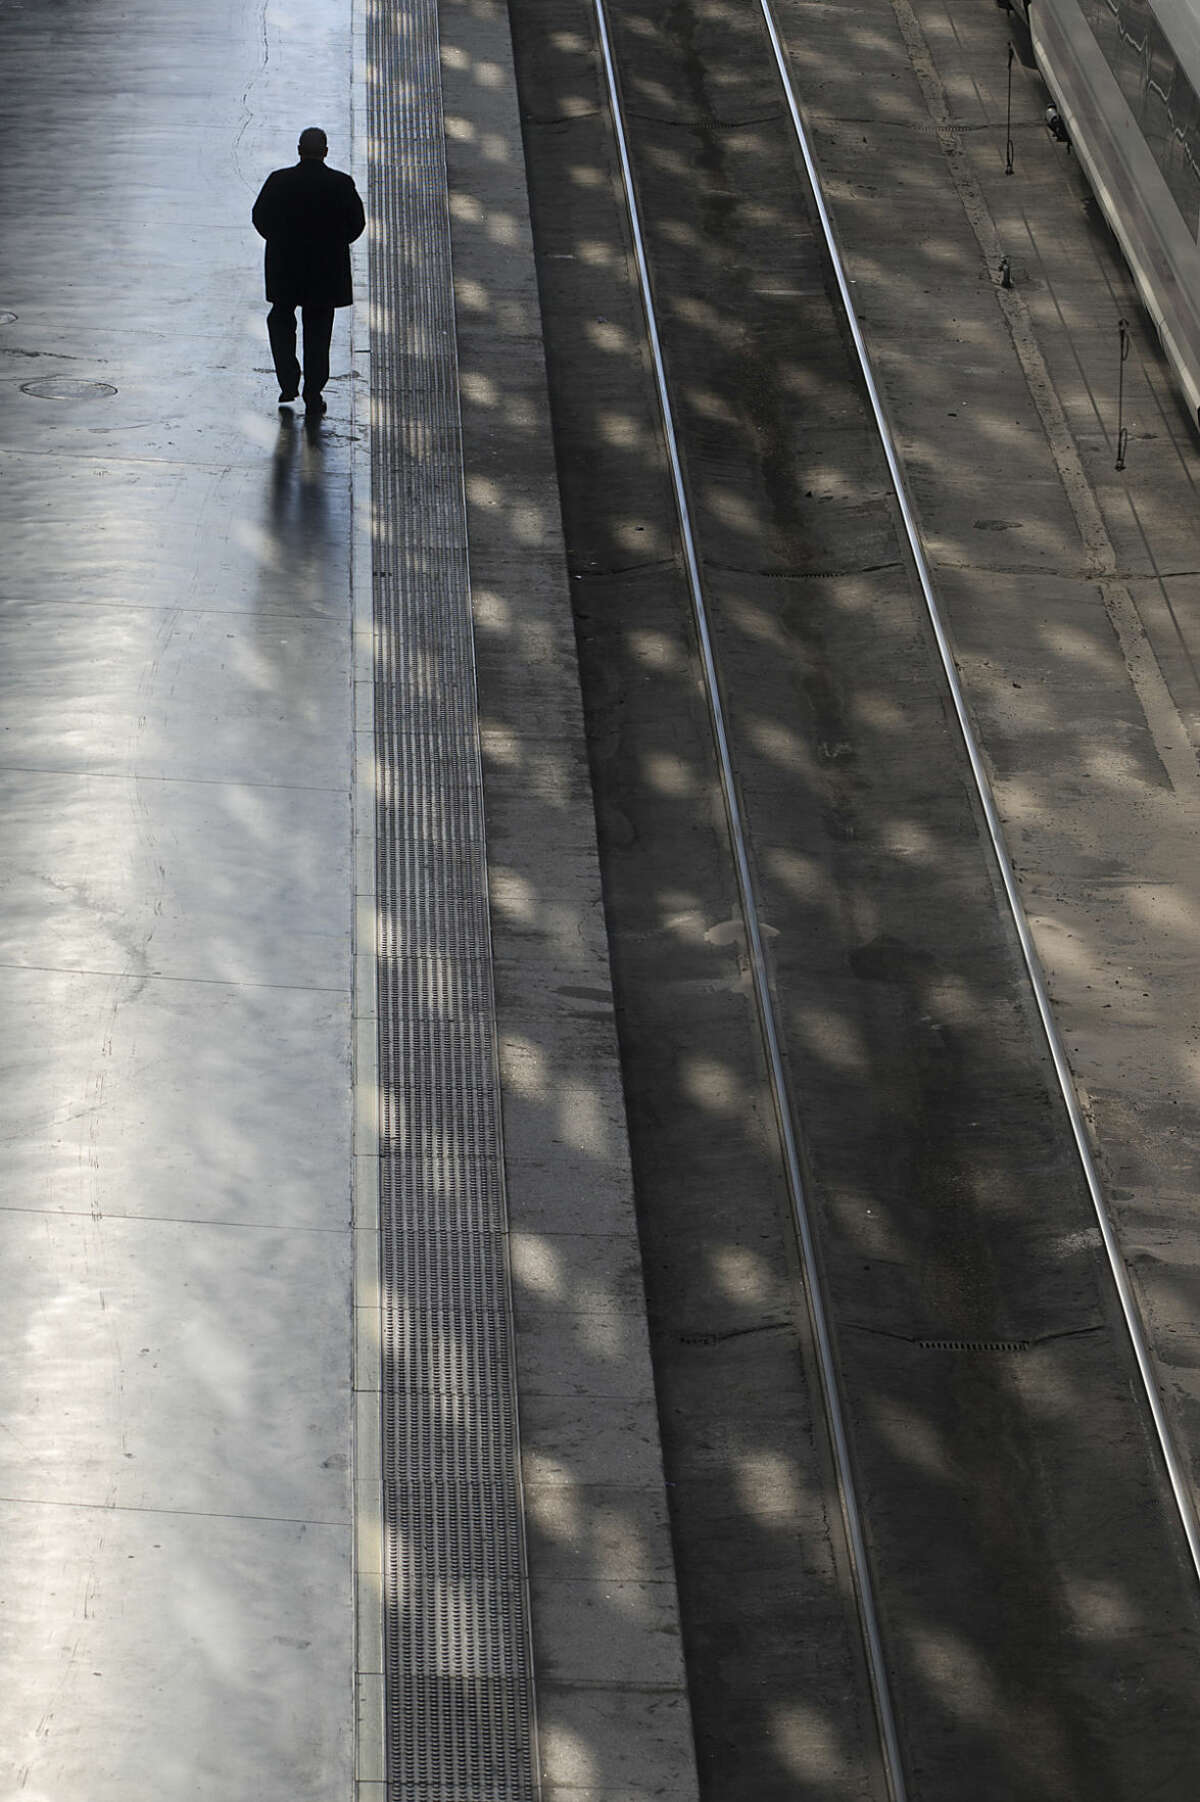 A man walks on a platform at Atocha train station in Madrid, Spain, Friday, March 11, 2016 Friday marks the 12th anniversary of Europe's worst Islamic terrorist attack which killed 191 people.The attackers targeted four commuter trains with 10 shrapnel-filled bombs concealed in backpacks during morning rush hour on March 11, 2004. (AP Photo/Paul White)